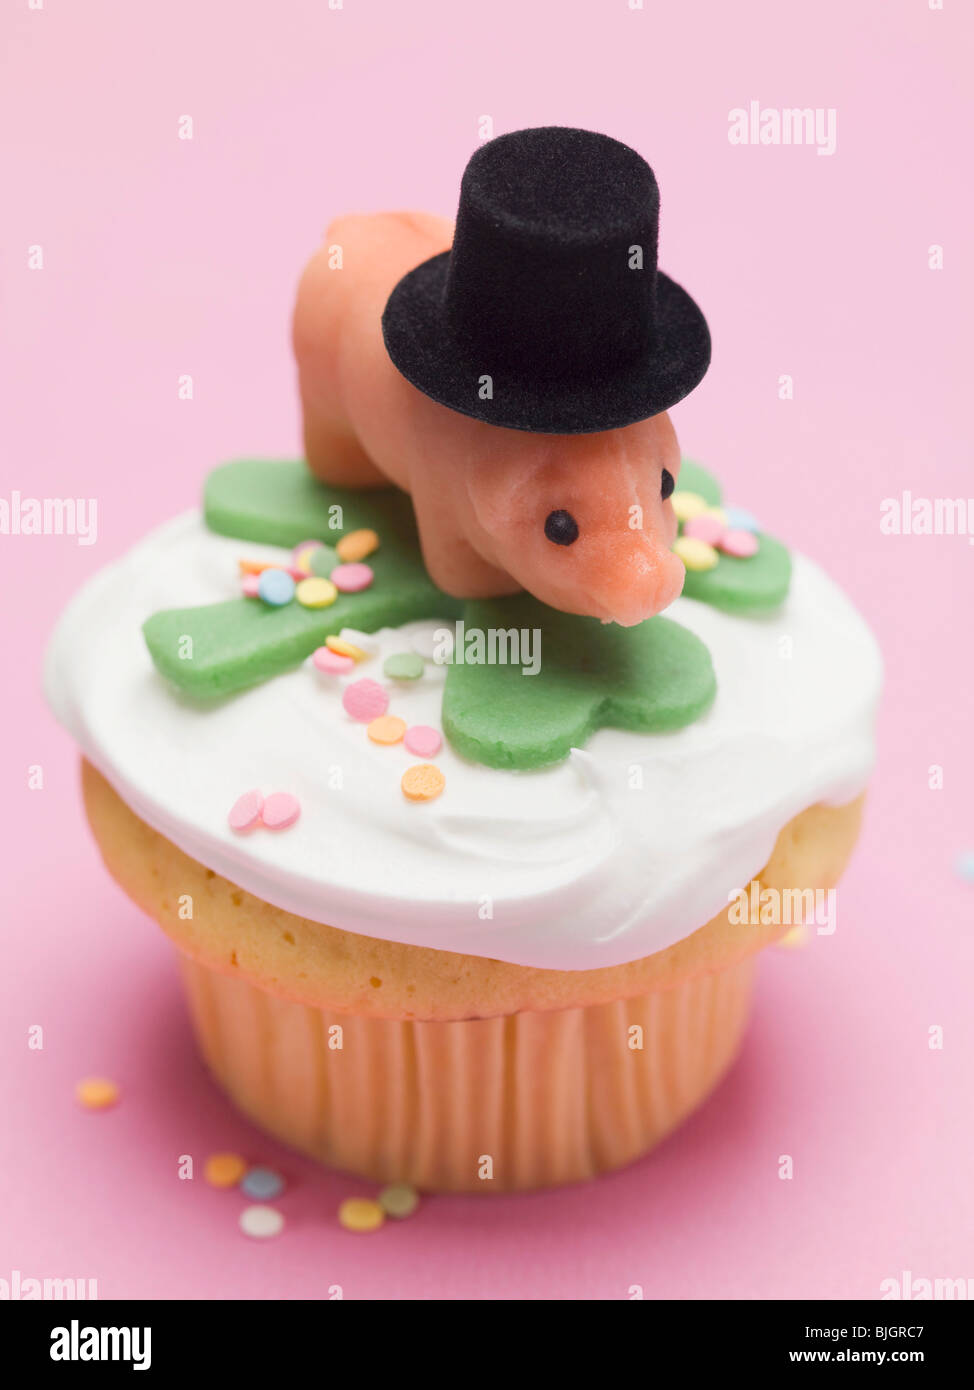 Cupcake with lucky charms for New Year's Eve - Stock Photo